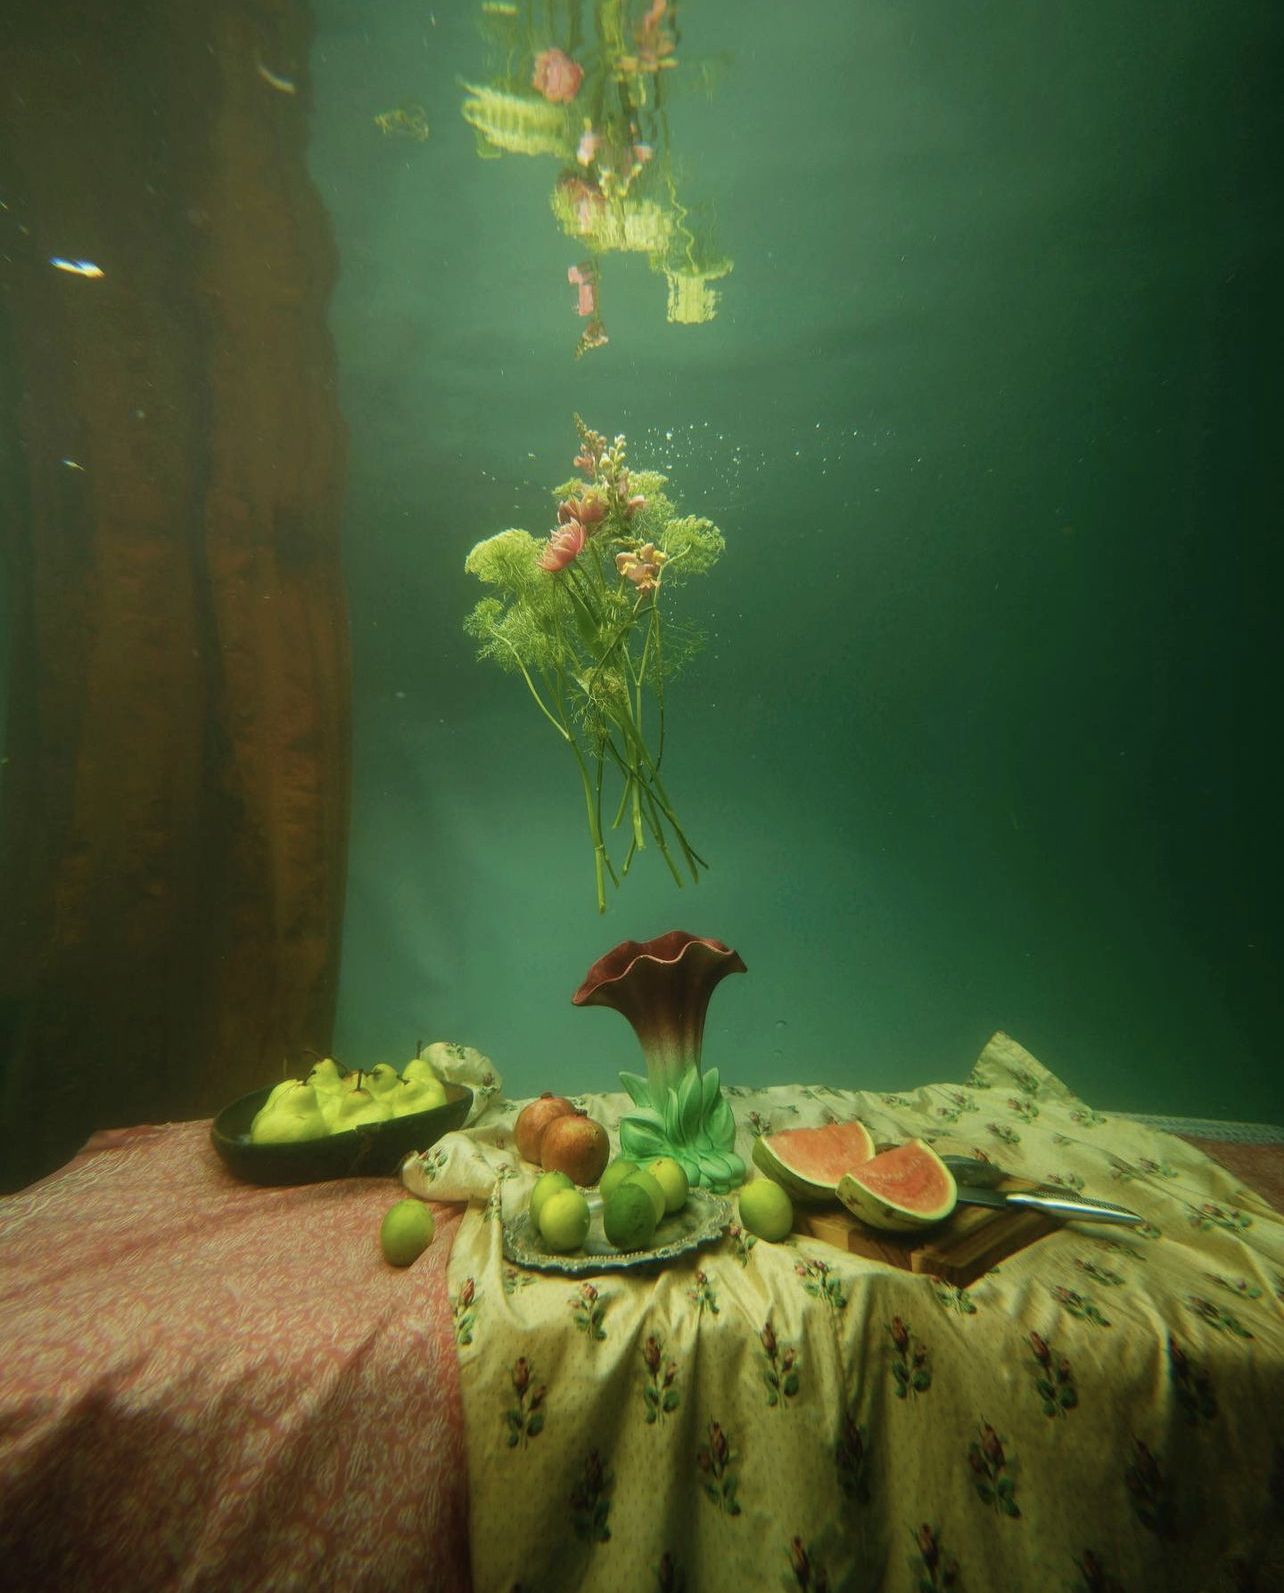 Underwater still life with floating flowers and fruits